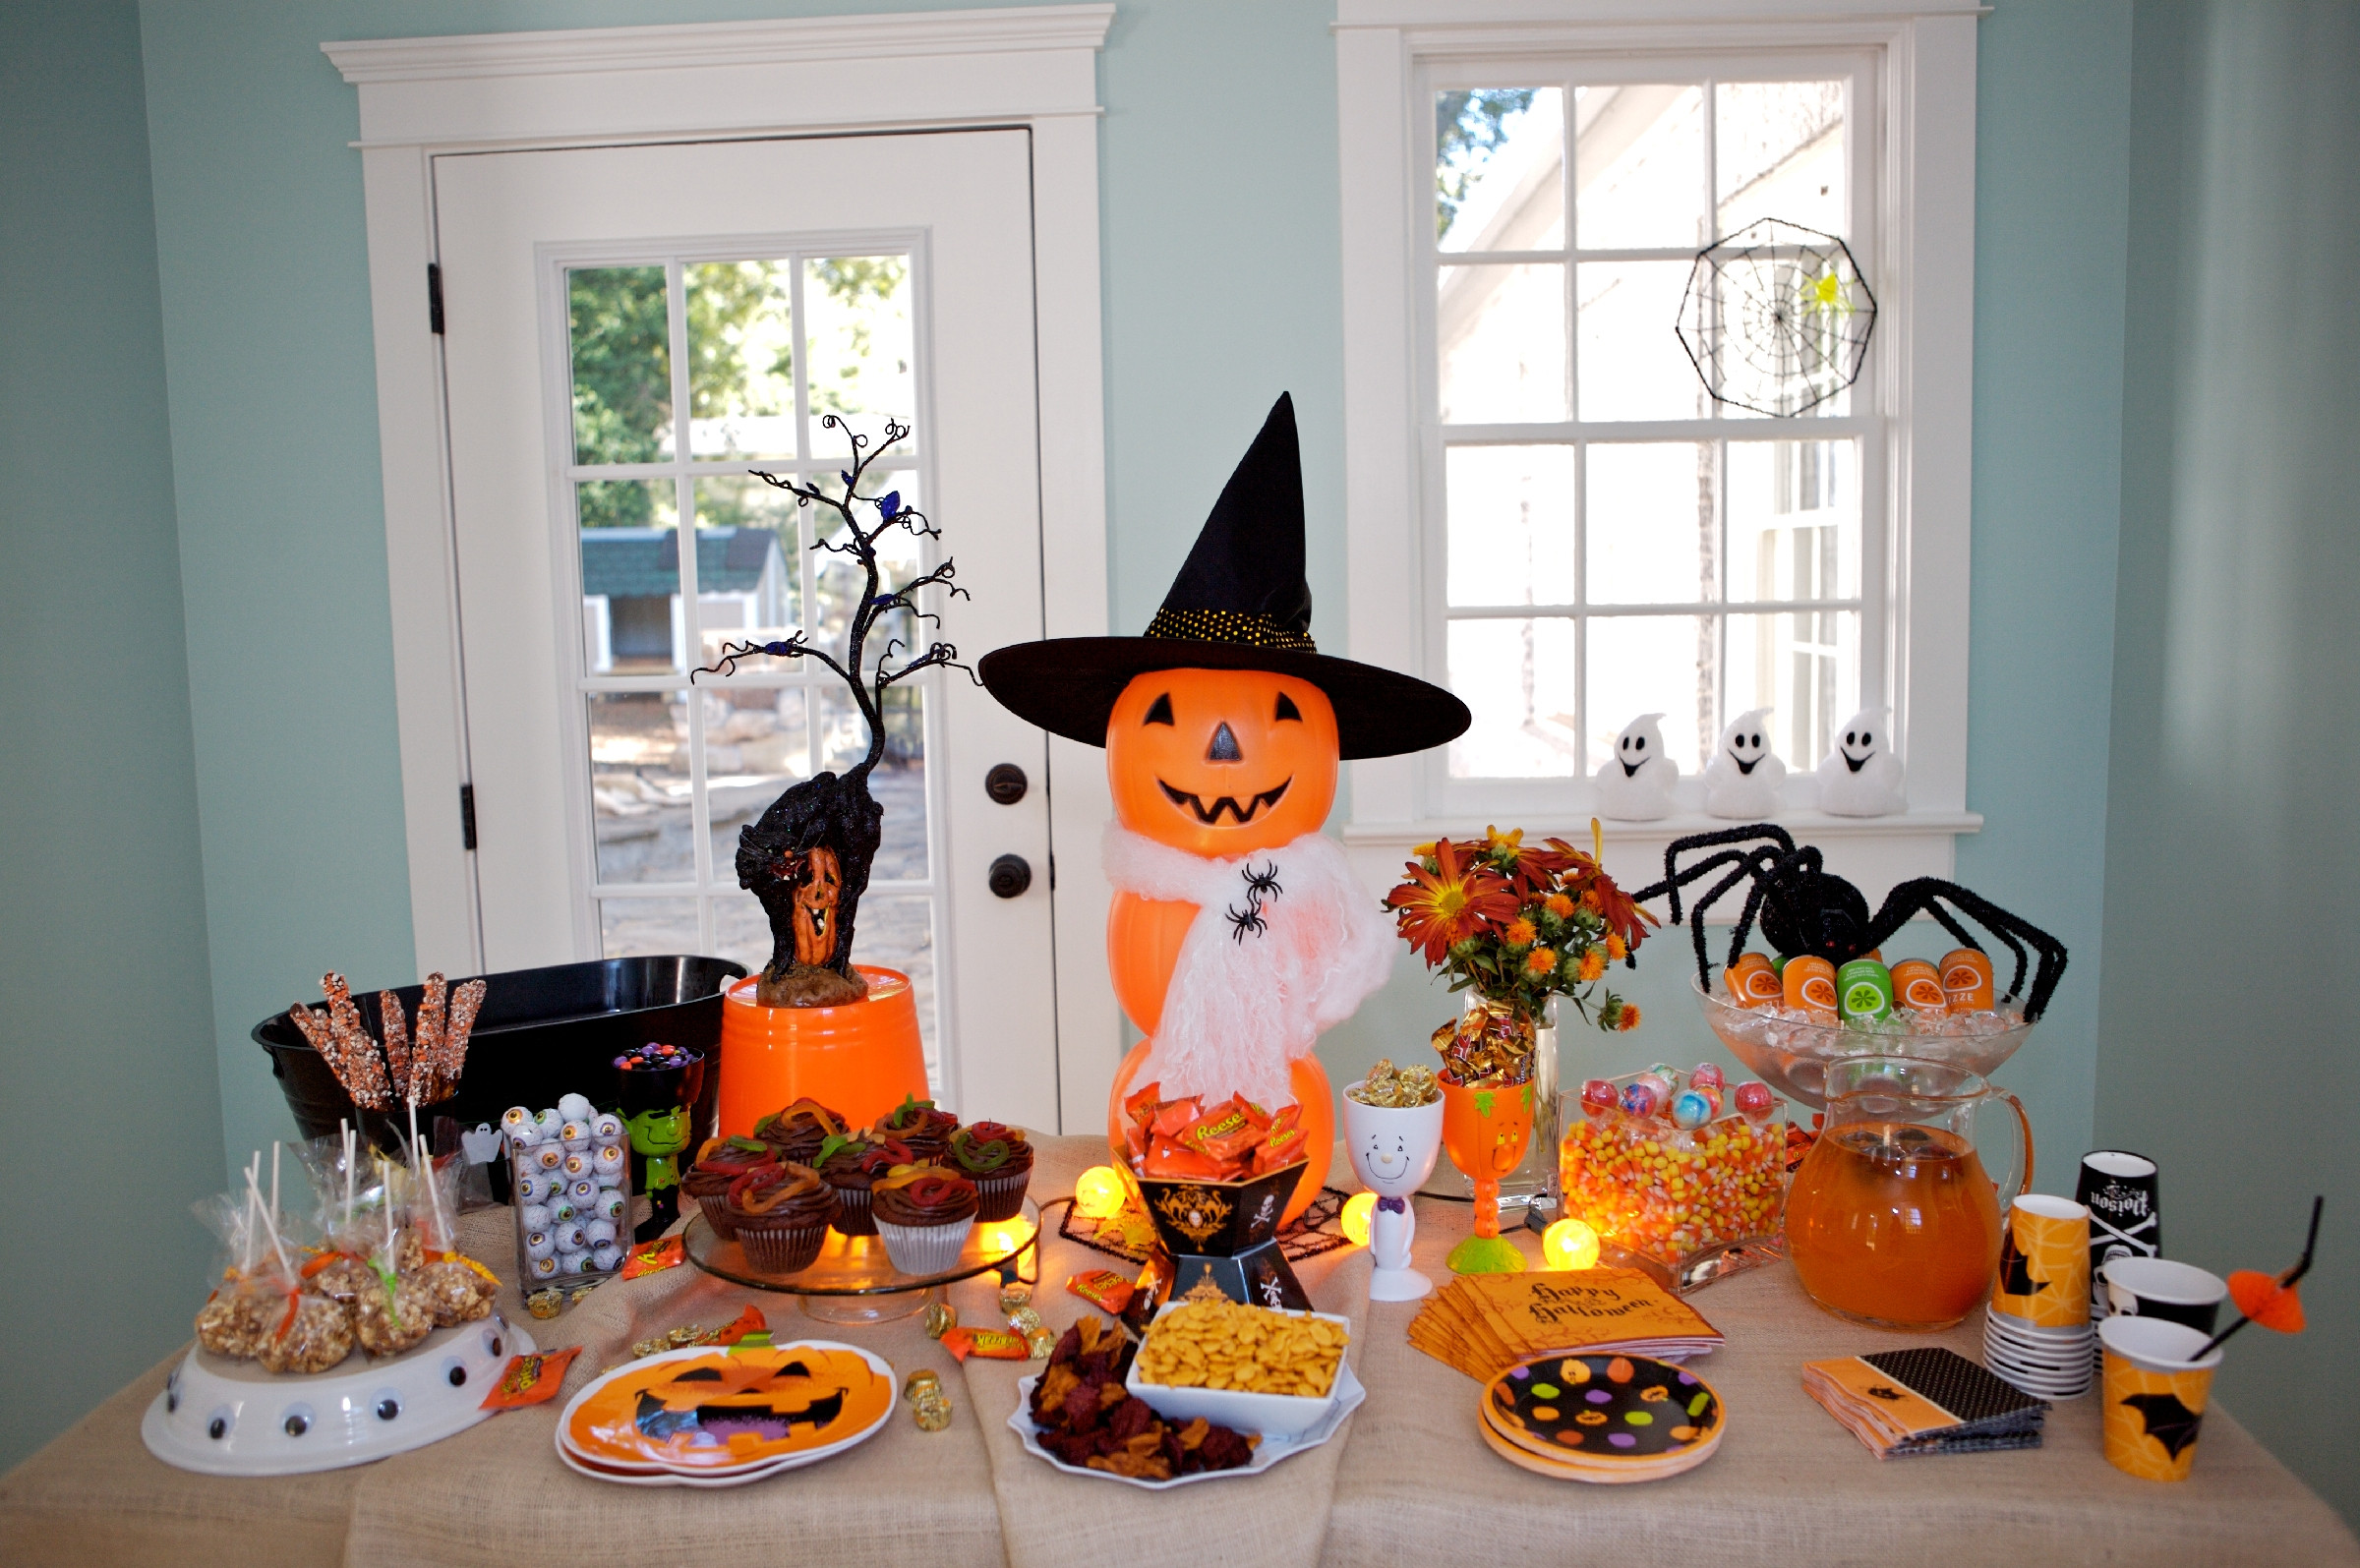 Halloween Decoration Ideas For Party
 Martie Knows Parties BLOG Host a Neighborhood